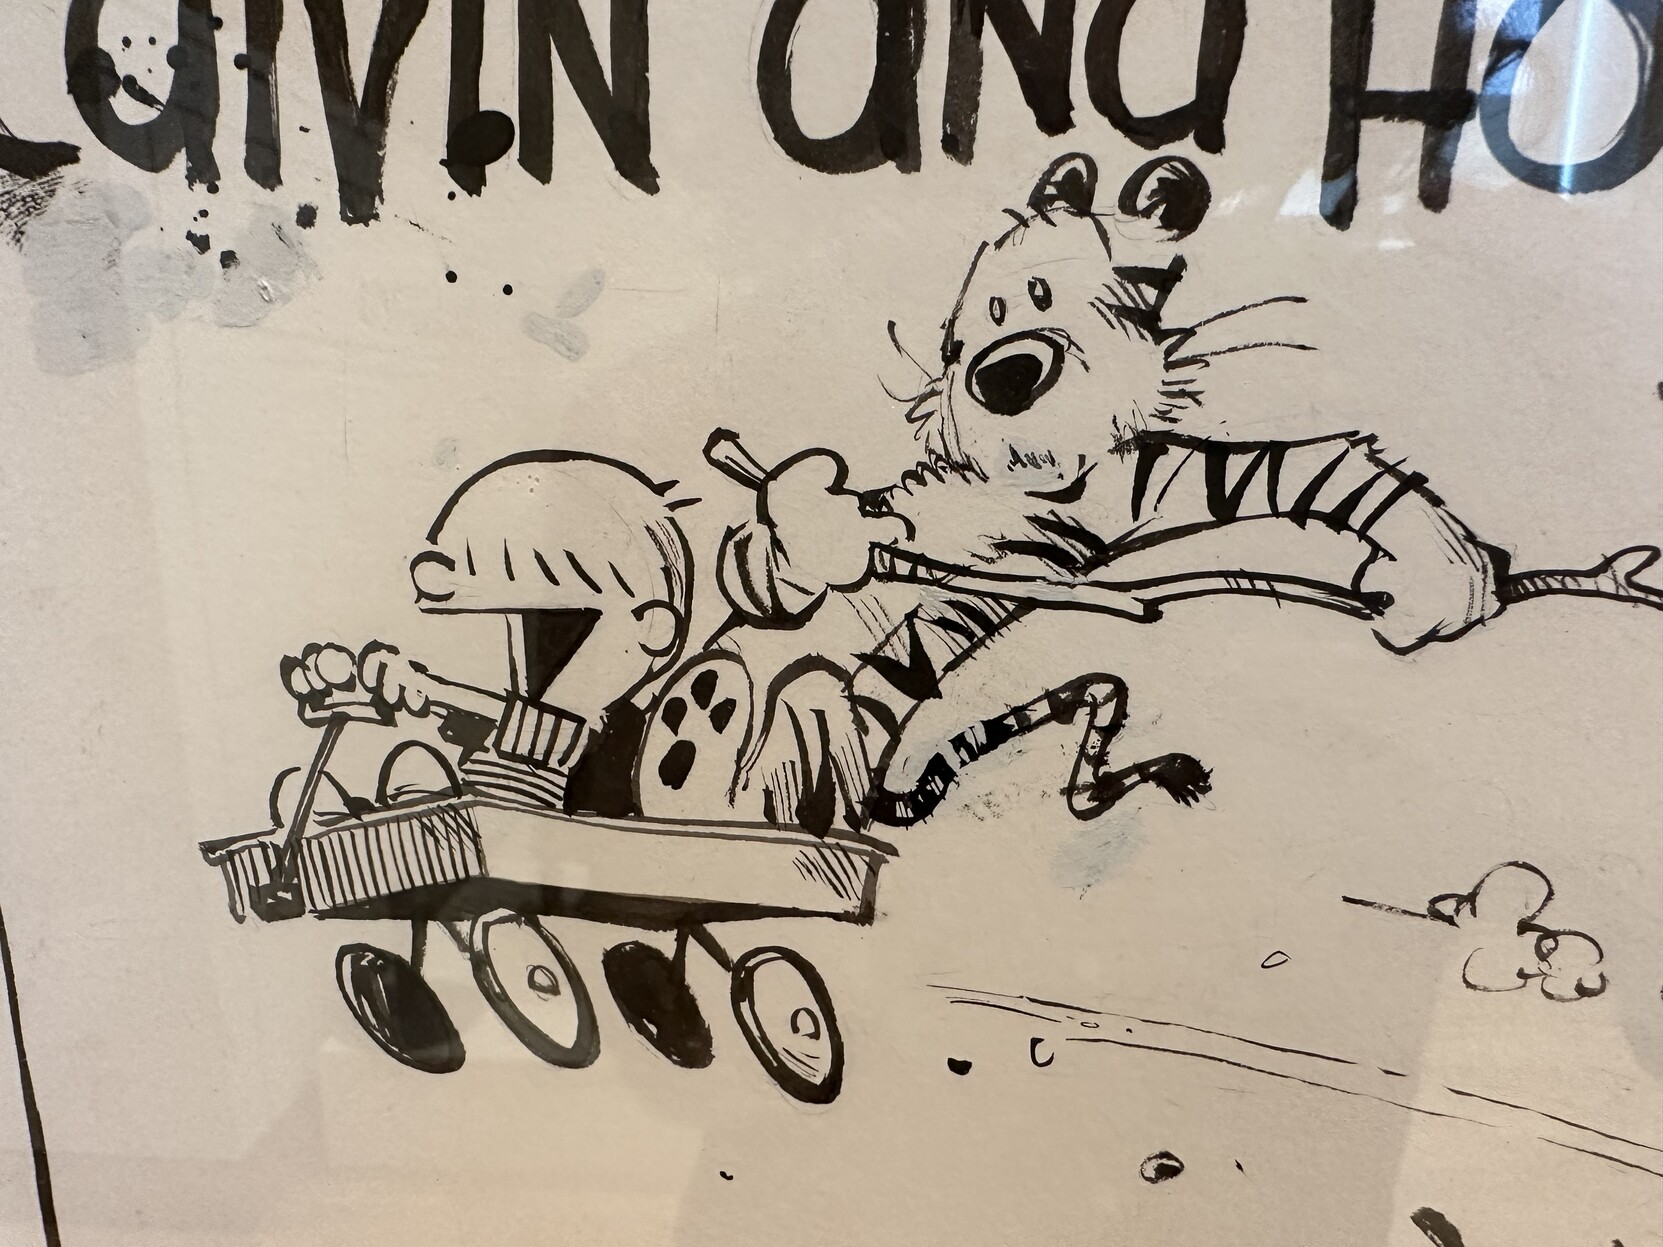 Calvin & Hobbes, in a hand-drawn sketch of the characters zooming along on a sled. Calvin's hair is not spiky. It's matted down over his eyes.